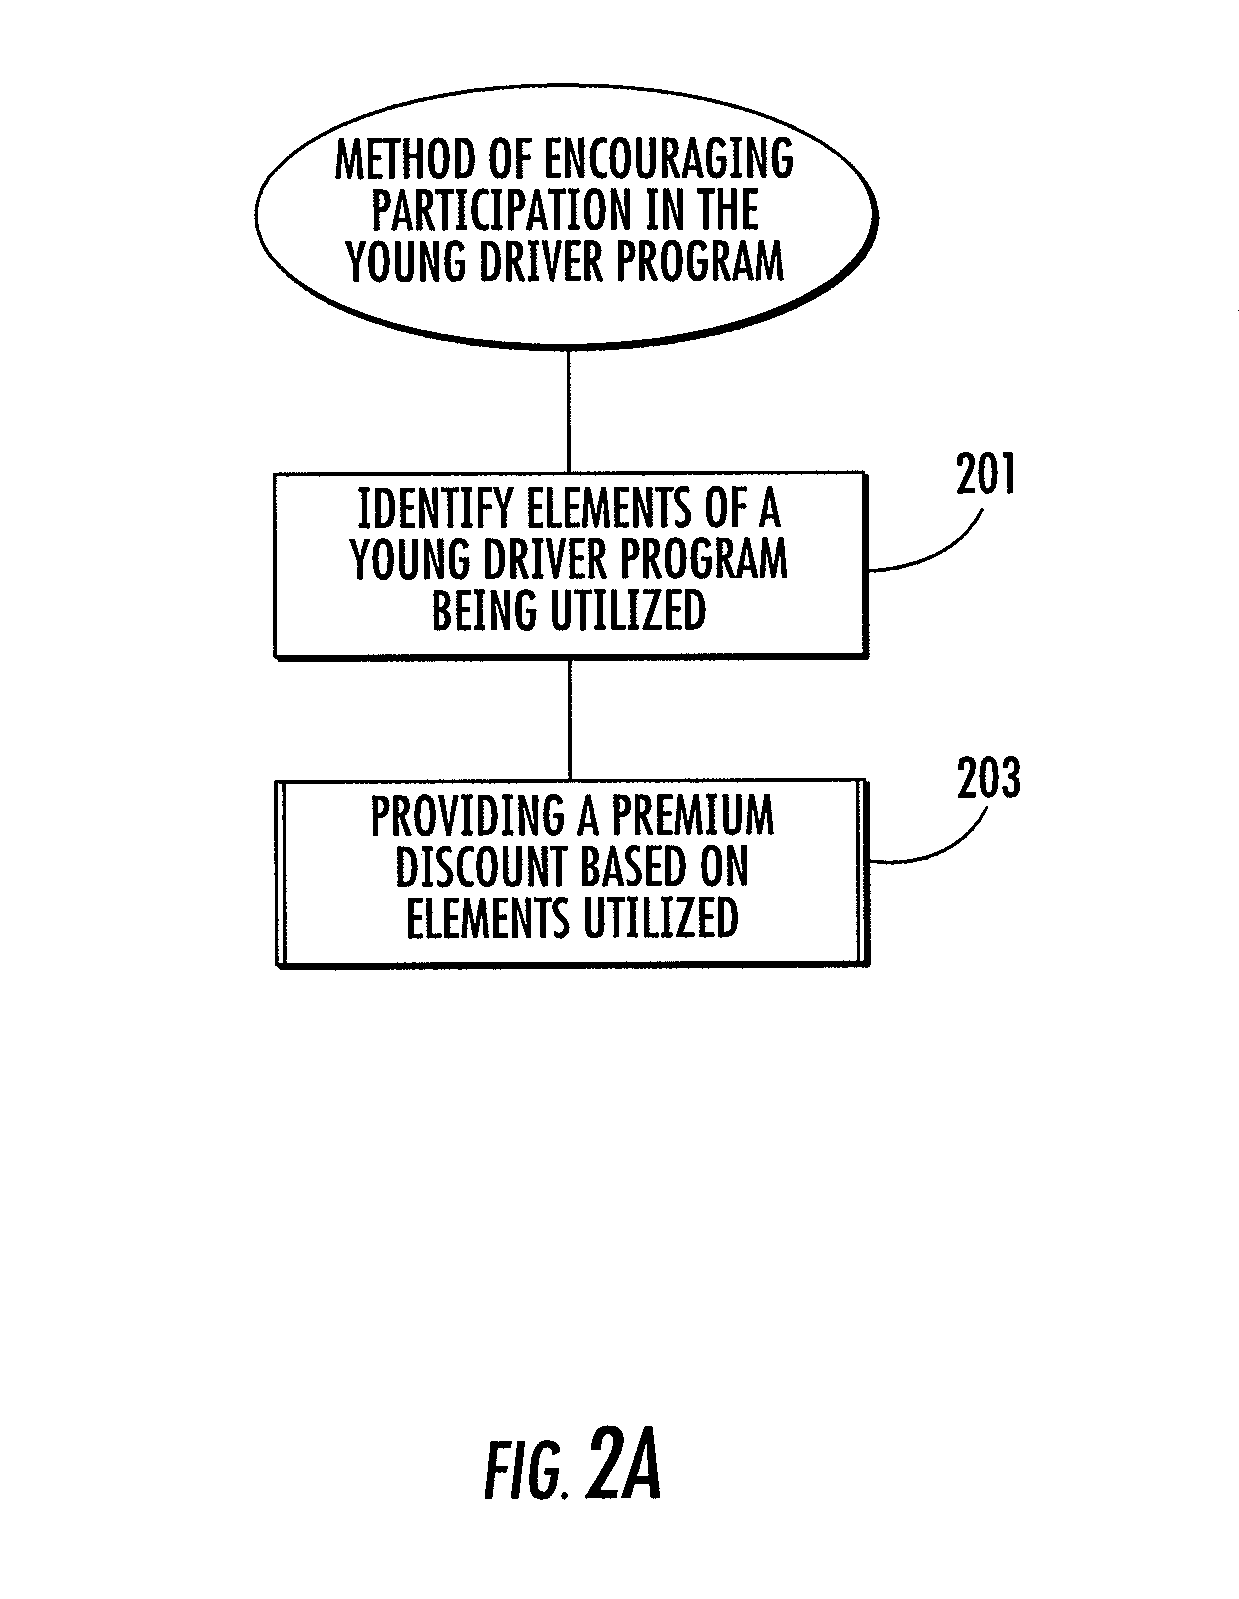 Web-based systems and methods for providing services related to automobile safety and an insurance product